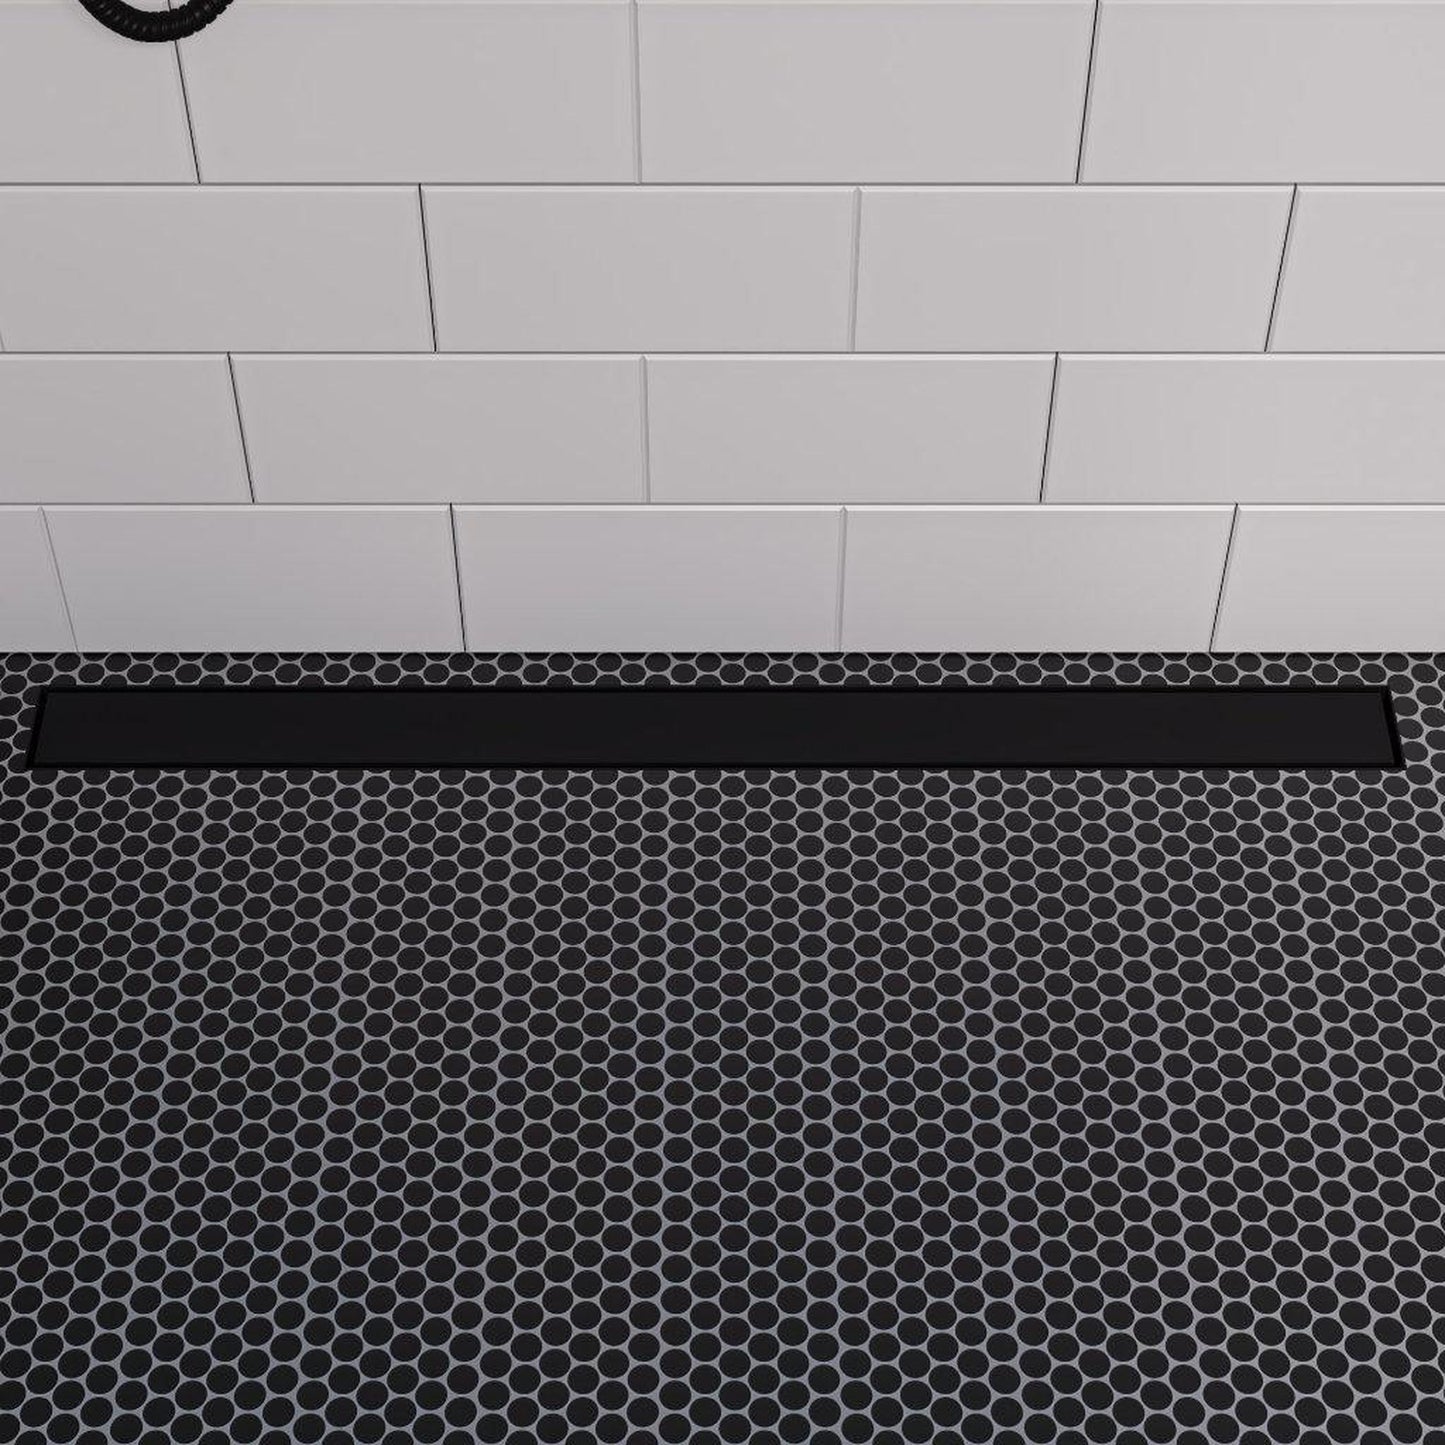 ALFI Brand ABLD36B-BM 36" Black Matte Stainless Steel Rectangle Linear Shower Drain With Solid Cover